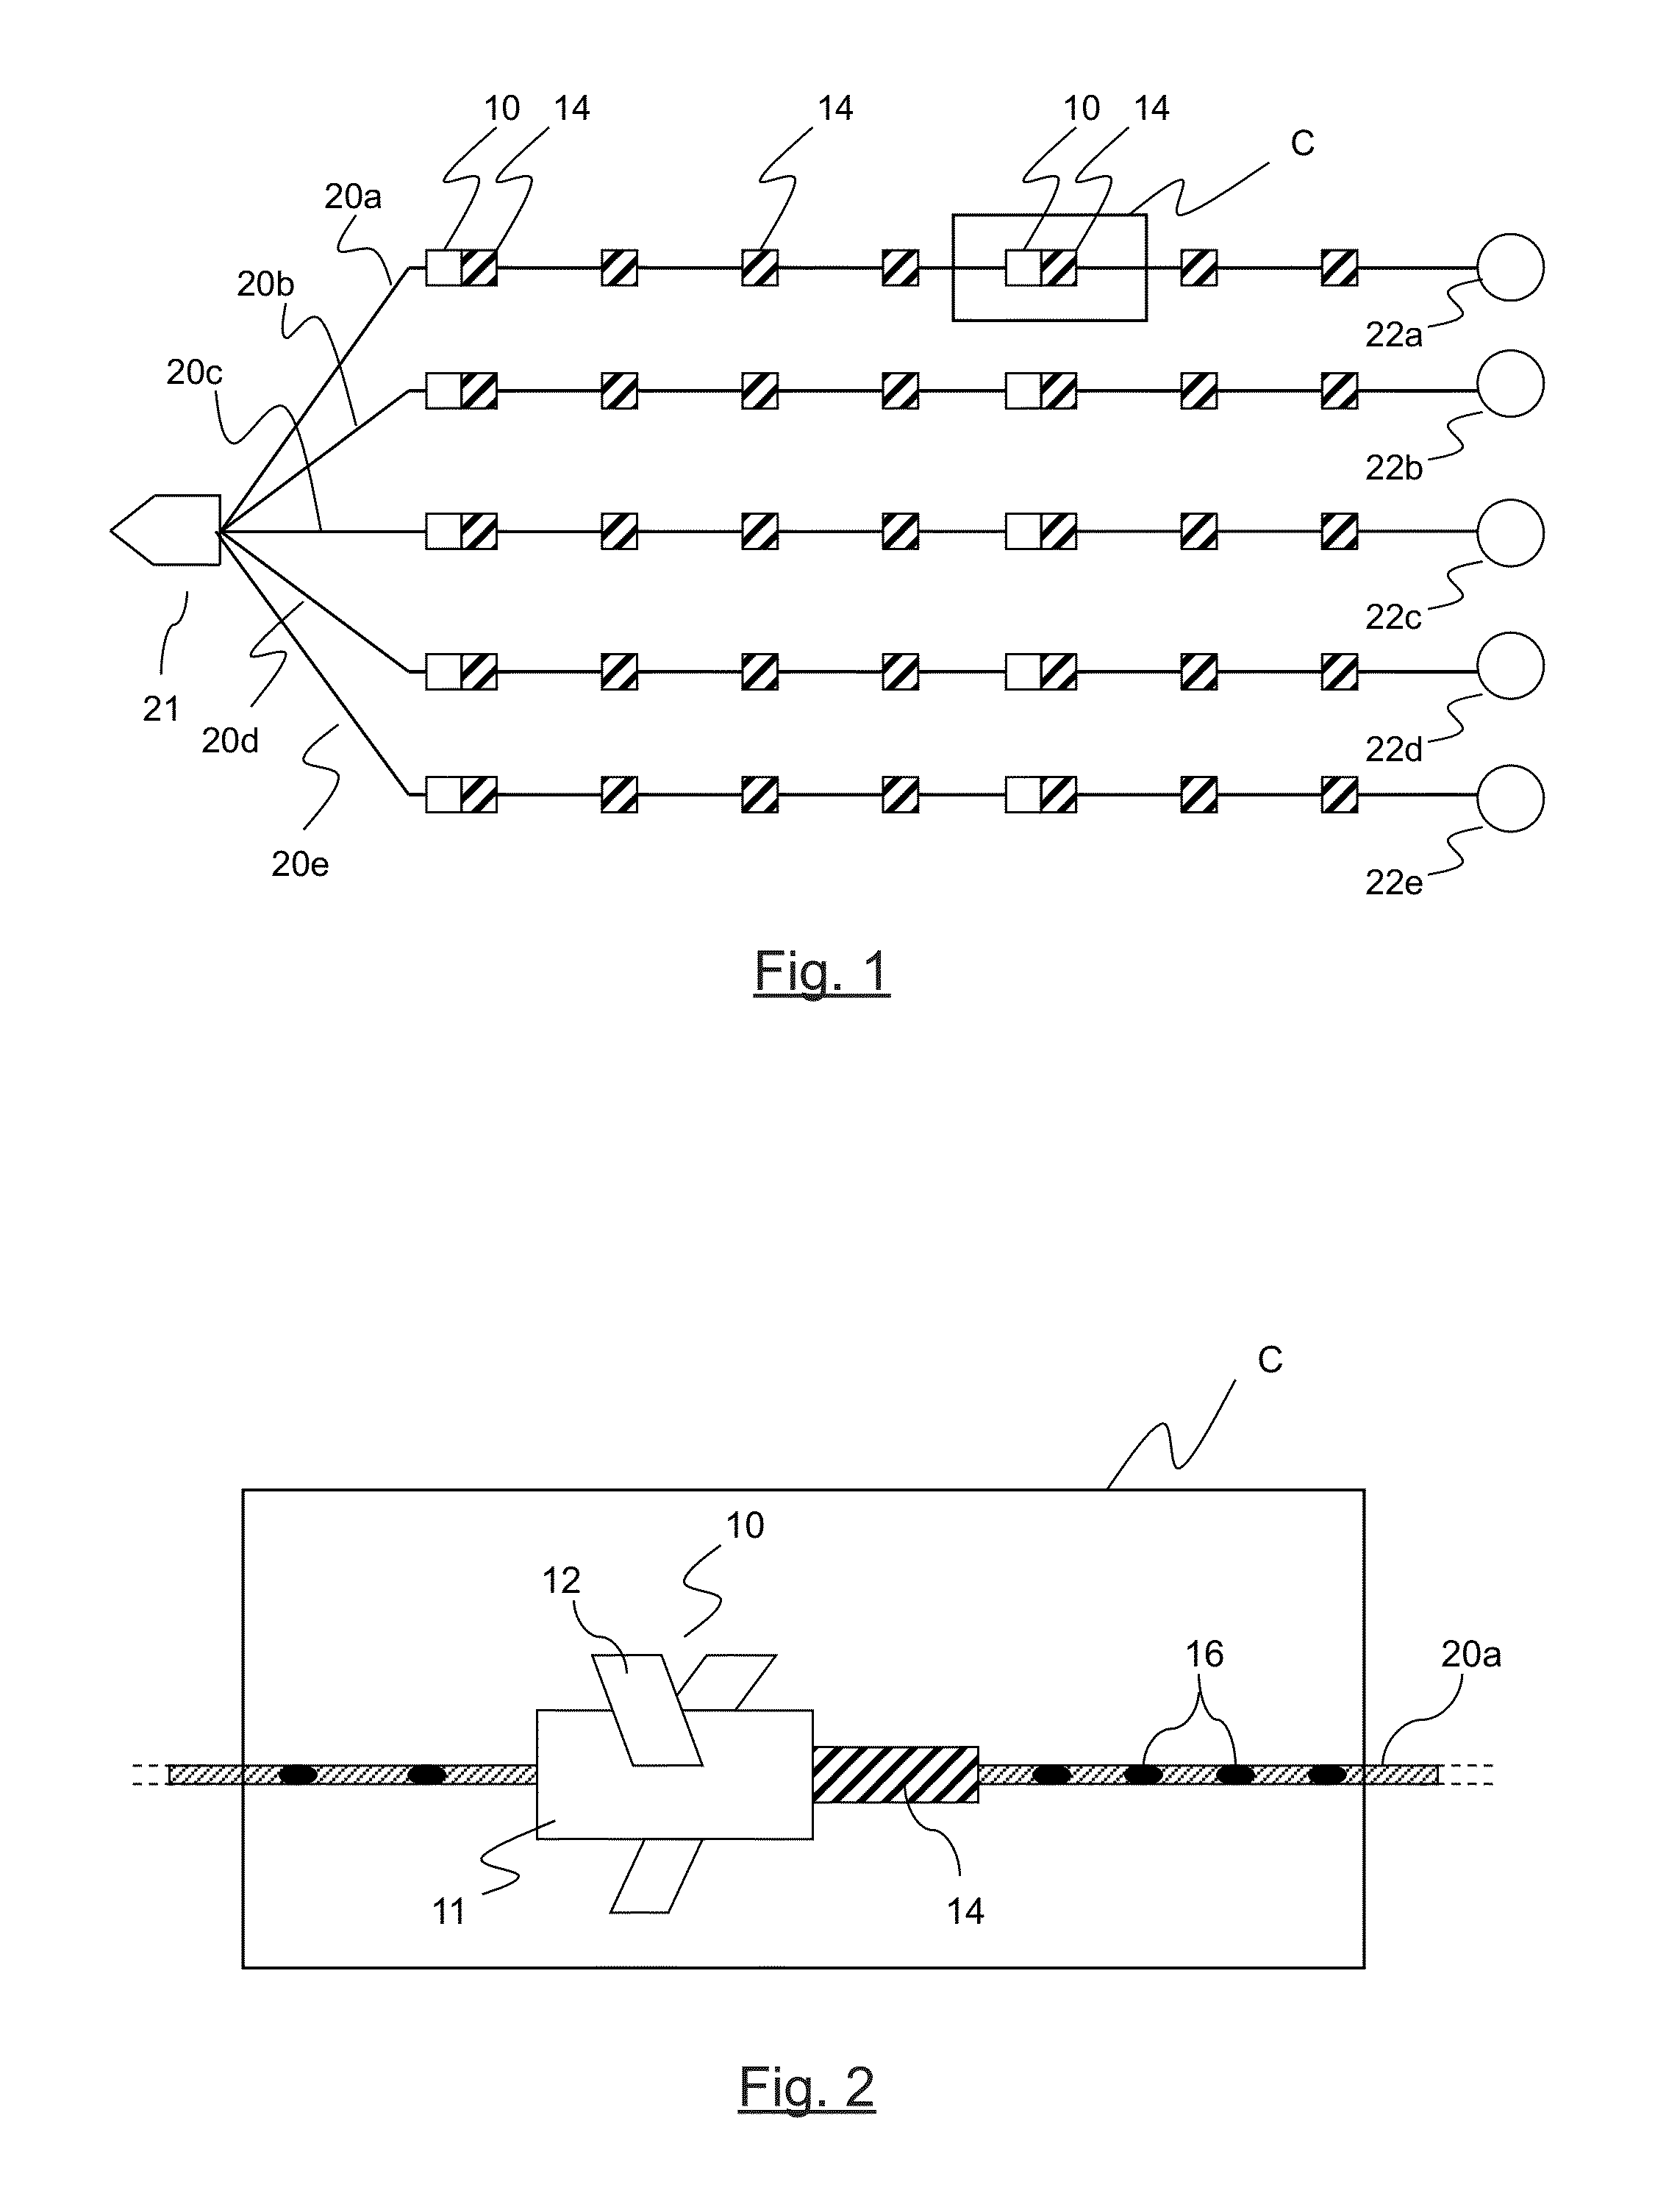 Seismic Data Acquisition System Comprising at Least One Towfish Tail Device Connectable to a Tail of a Towed Acoustic Linear Antenna